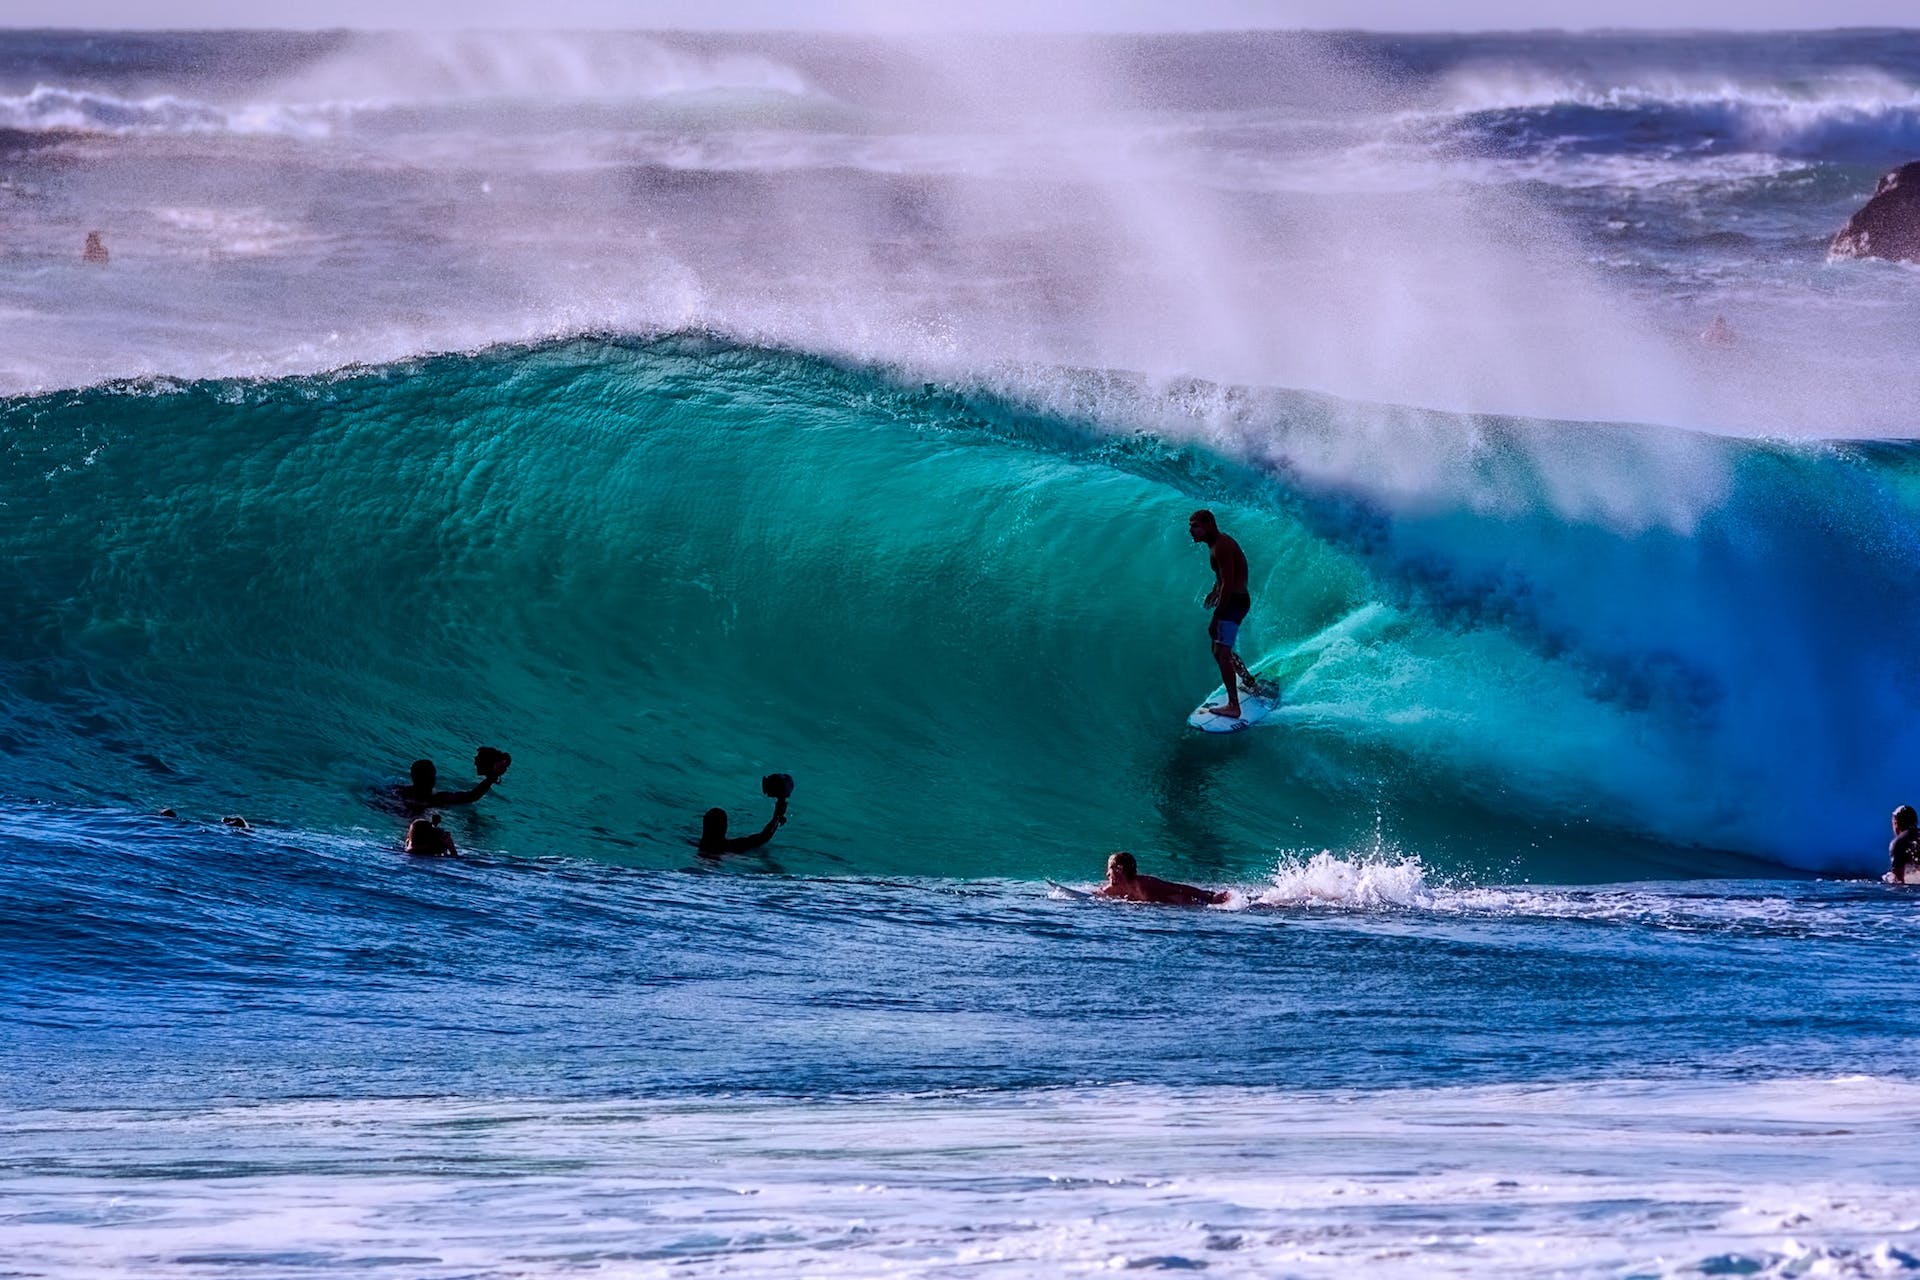 A hero image for the Strive Peptides homepage showing surfers in the waves with lots of blue and green water